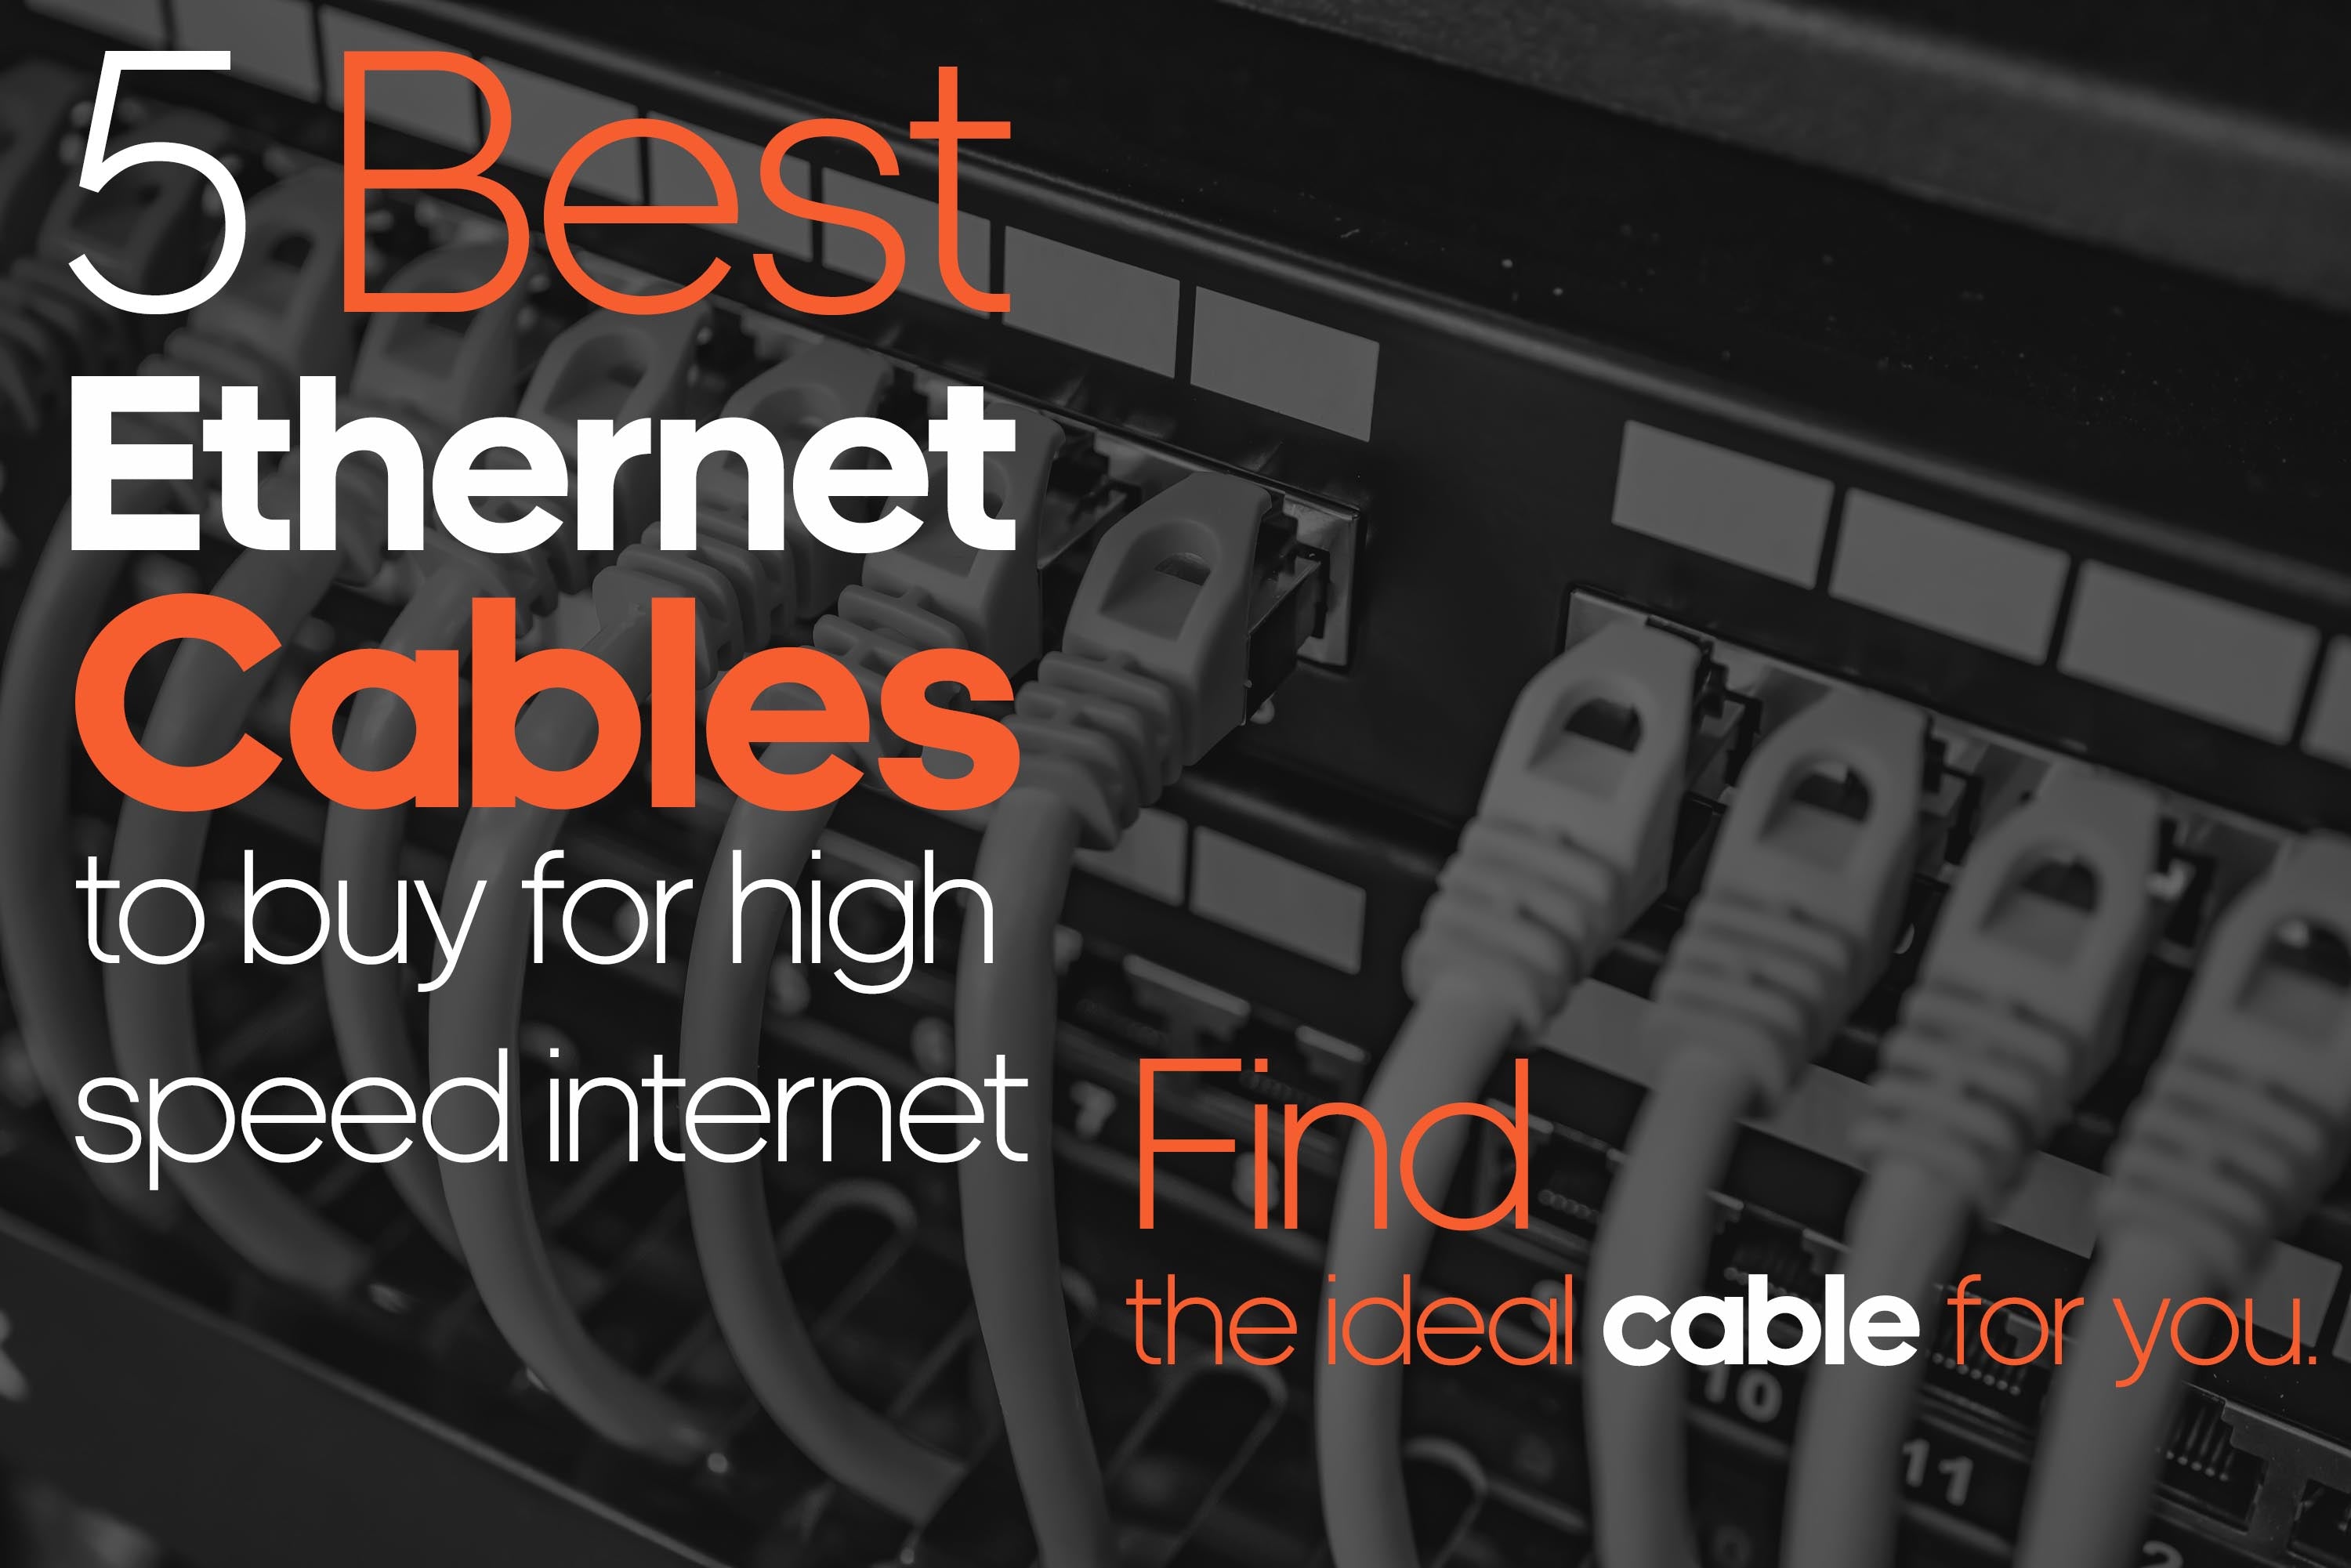 5 Best Ethernet Cables To Buy For High Speed Internet